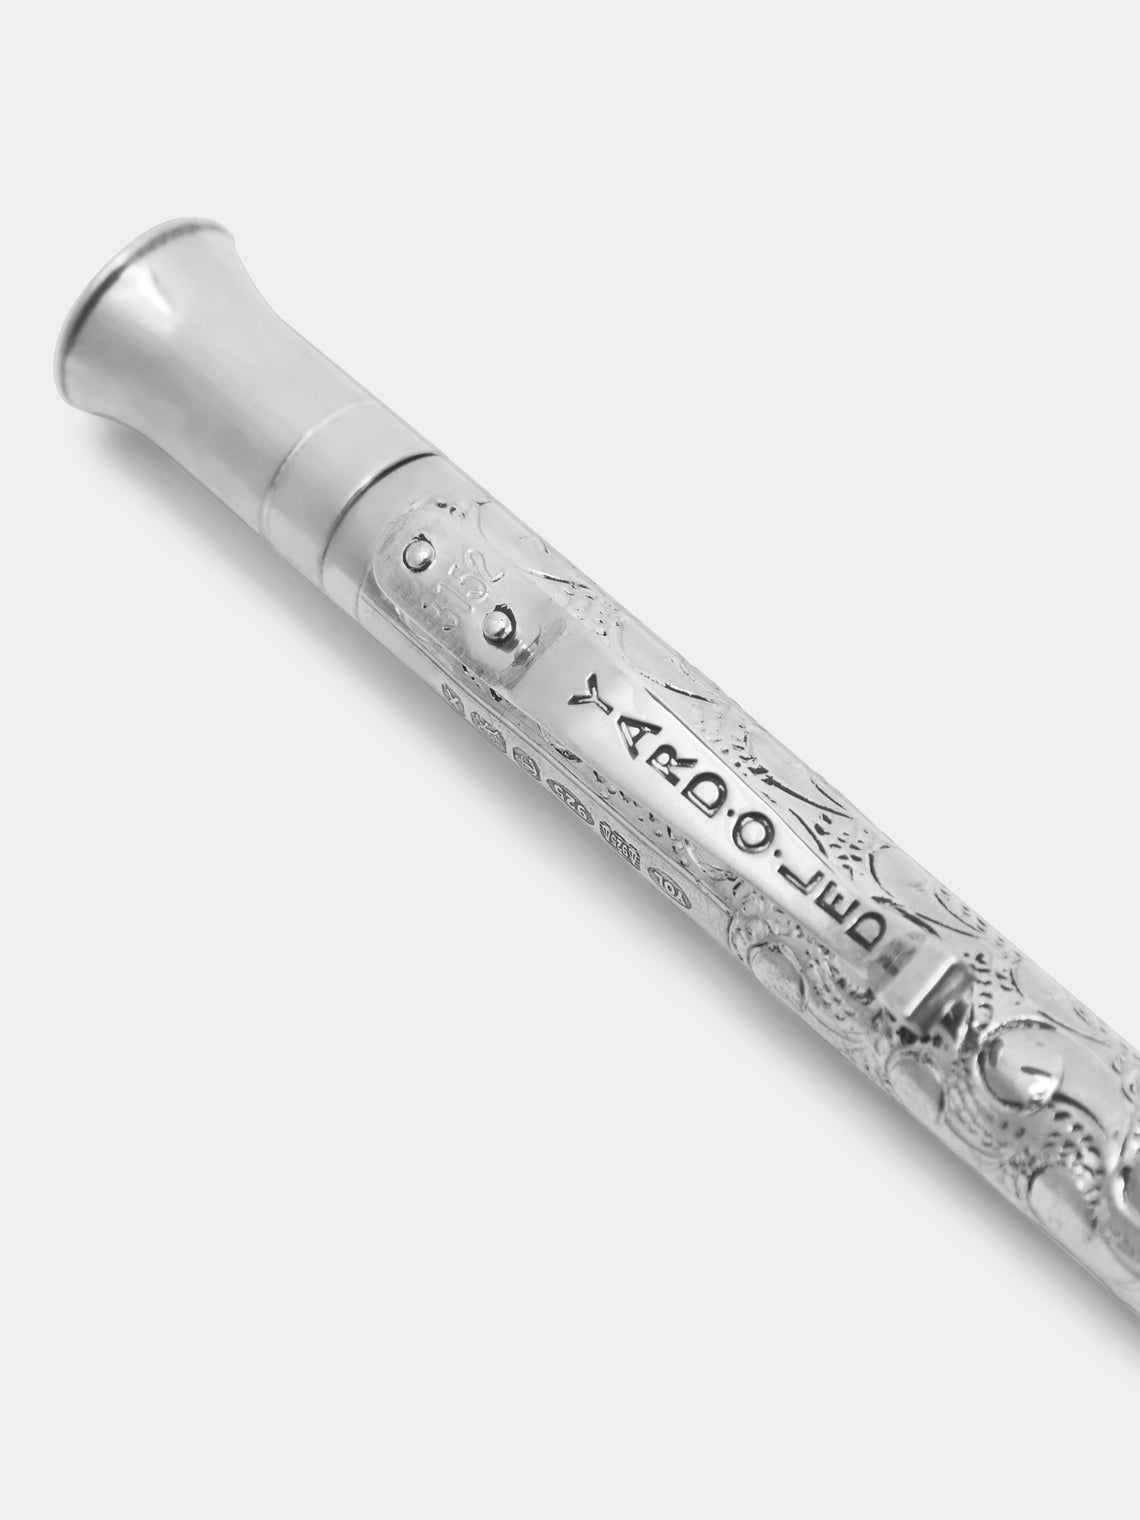 Yard O Led - Perfecta Victorian Sterling Silver Ball Pen - Silver - ABASK